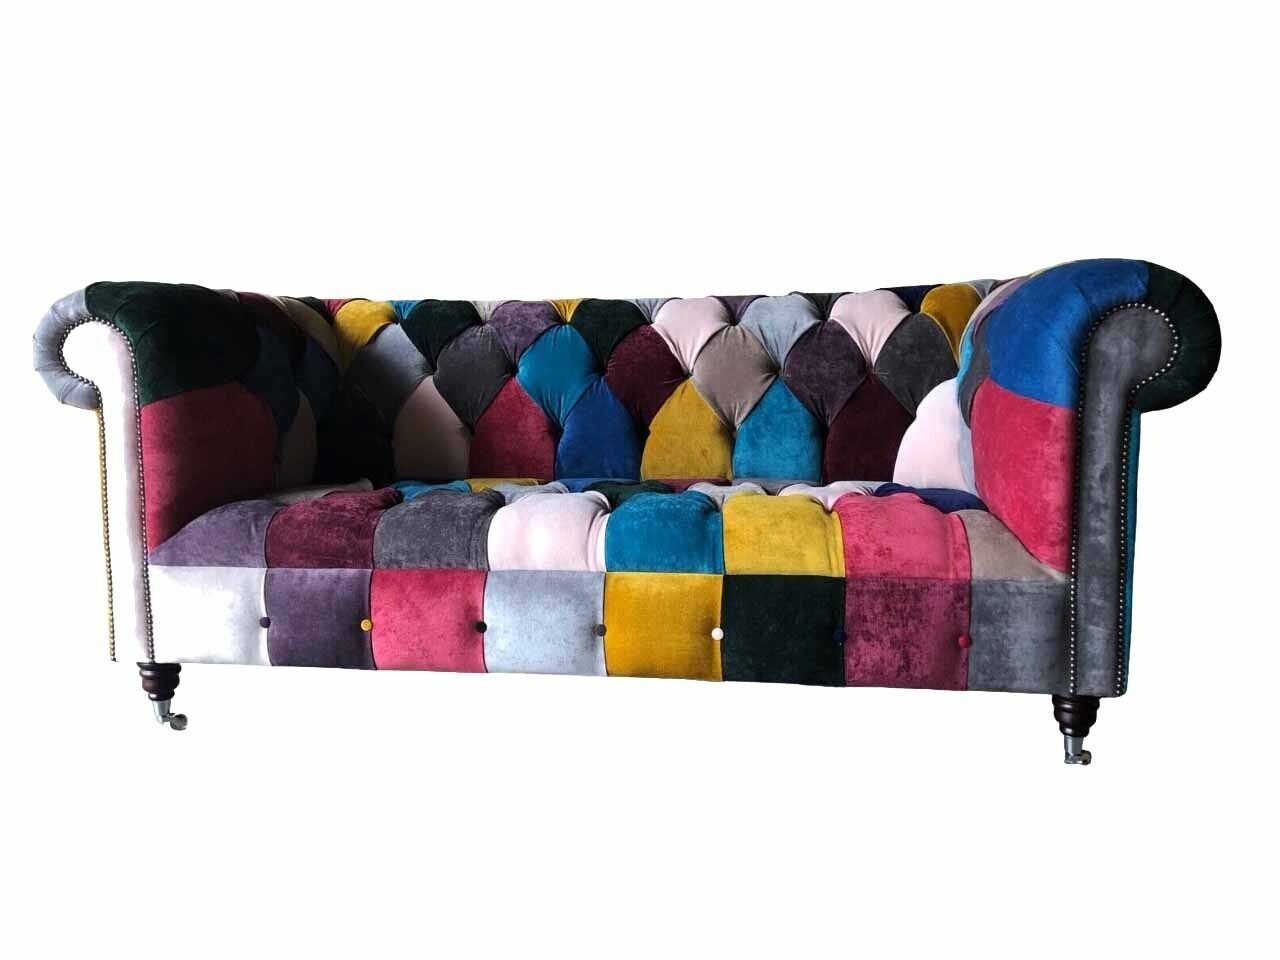 Europe Stoff, in 3 Made Bunter Polster Sofa Luxus Sofa JVmoebel Chesterfield Couch Sitzer Sofas